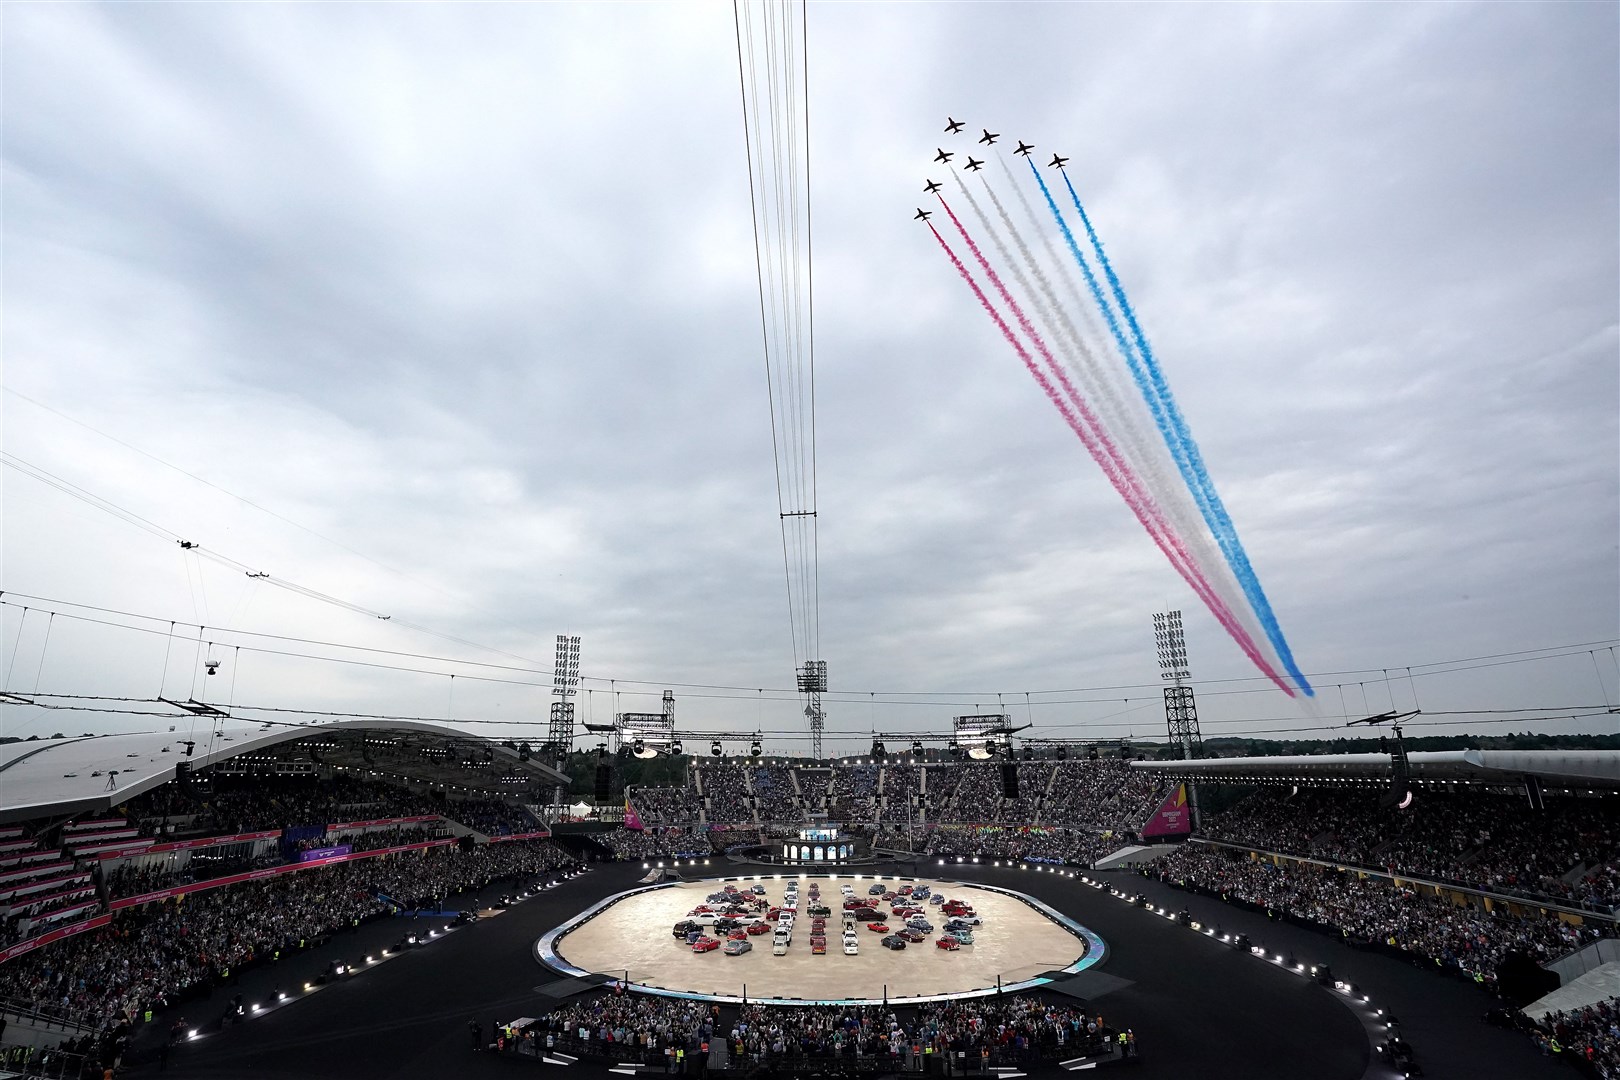 The Red Arrows flypast goes over the stadium during the opening ceremony (Zac Goodwin/PA)